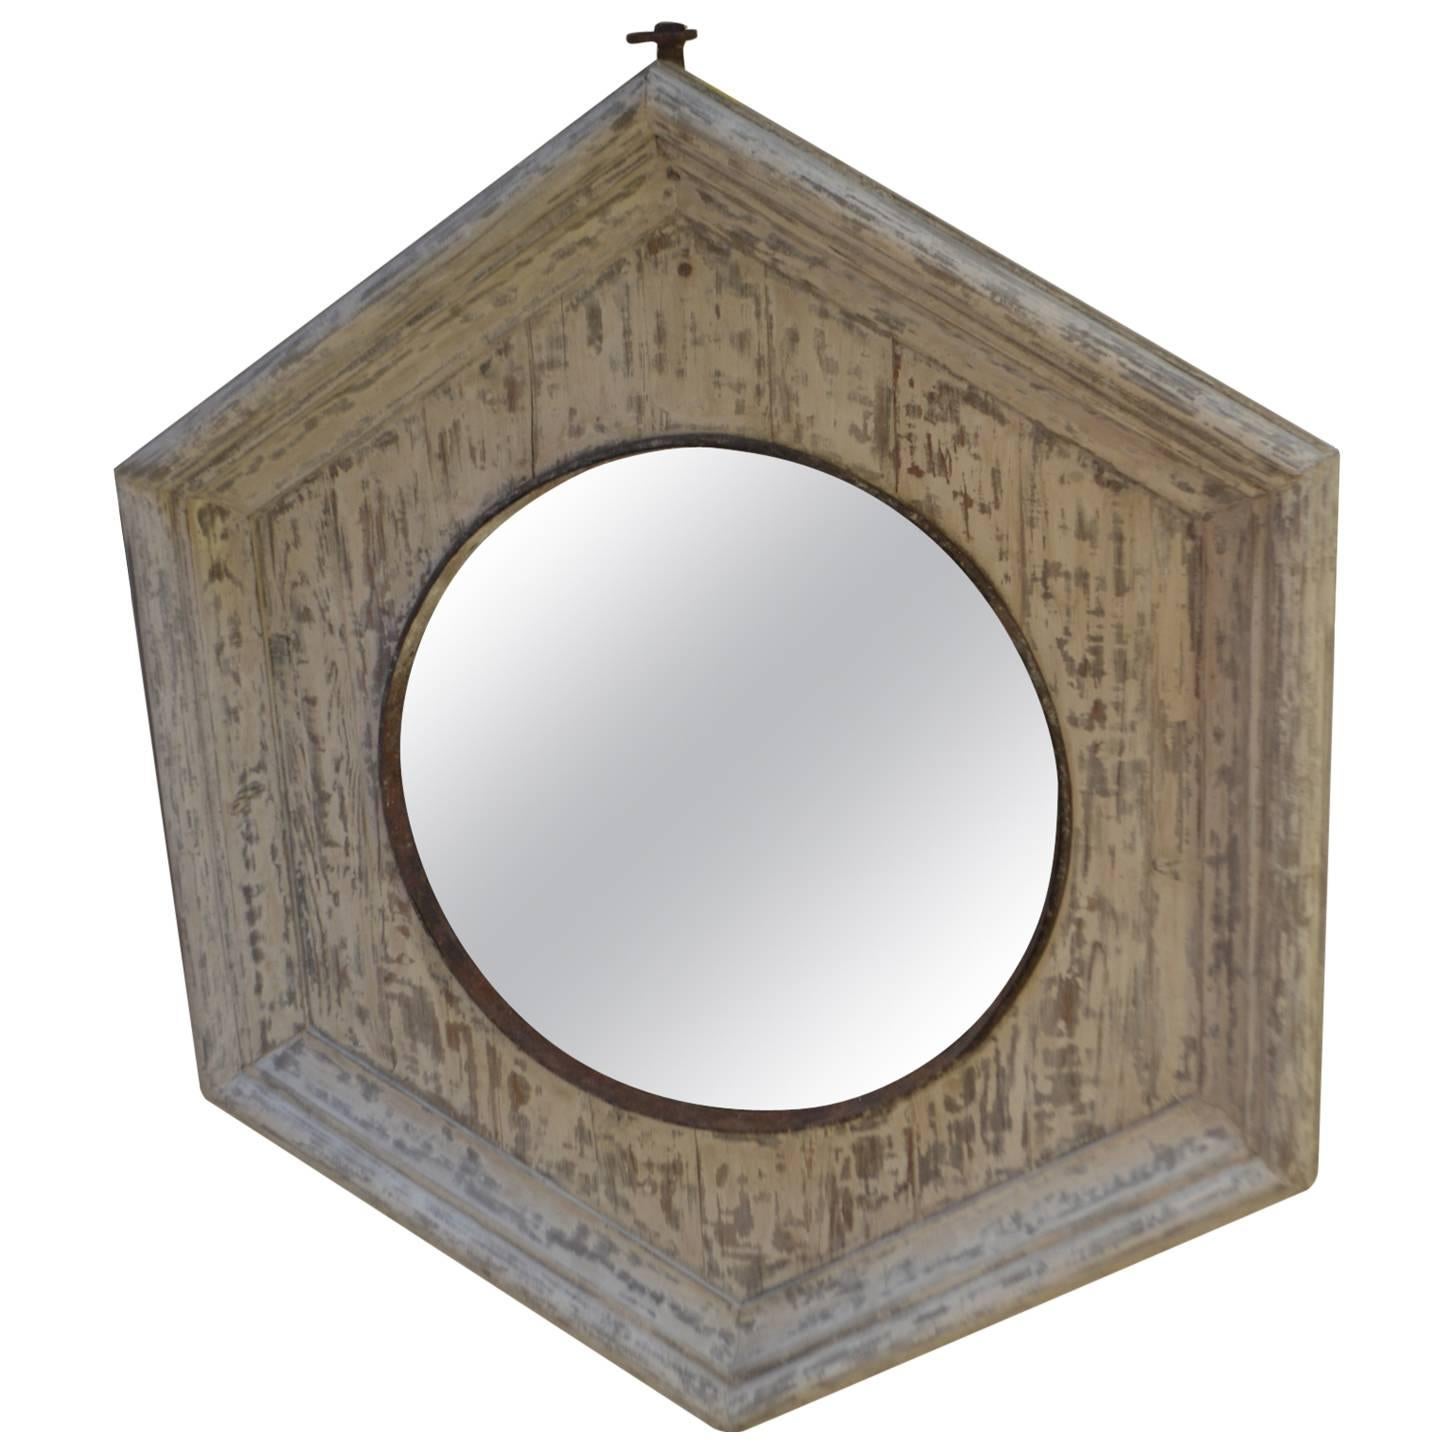 19th Century Pentagonal Signal Mirror in Weathered Antique Frame